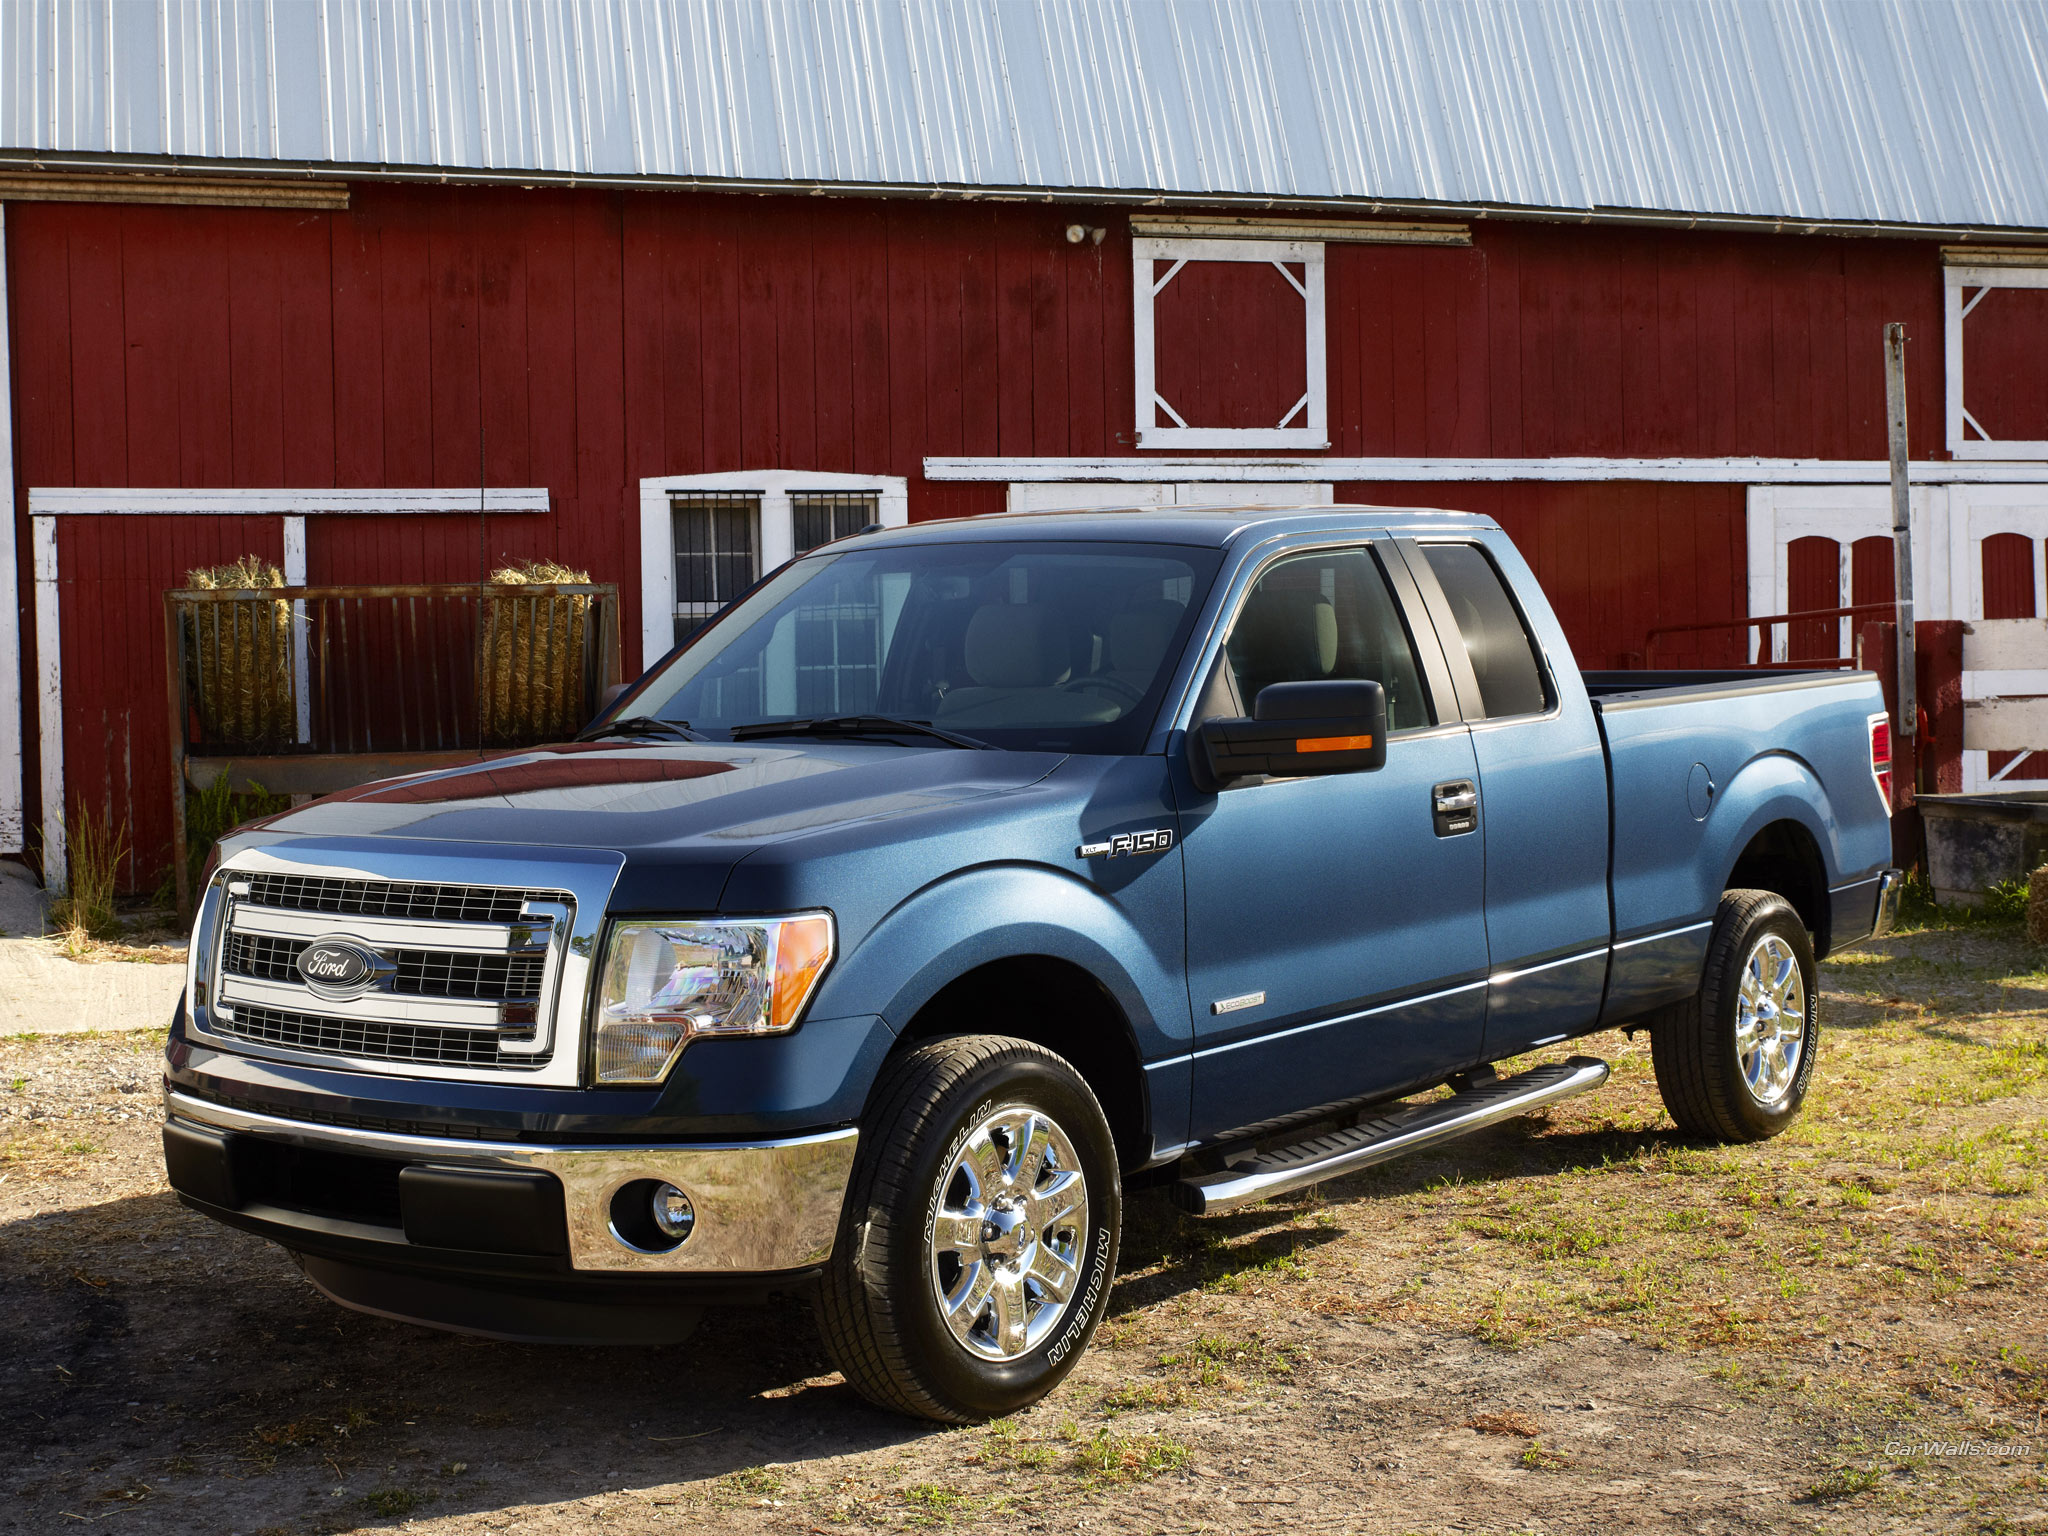 Vehicles 2013 Ford F-150 HD Wallpaper | Background Image